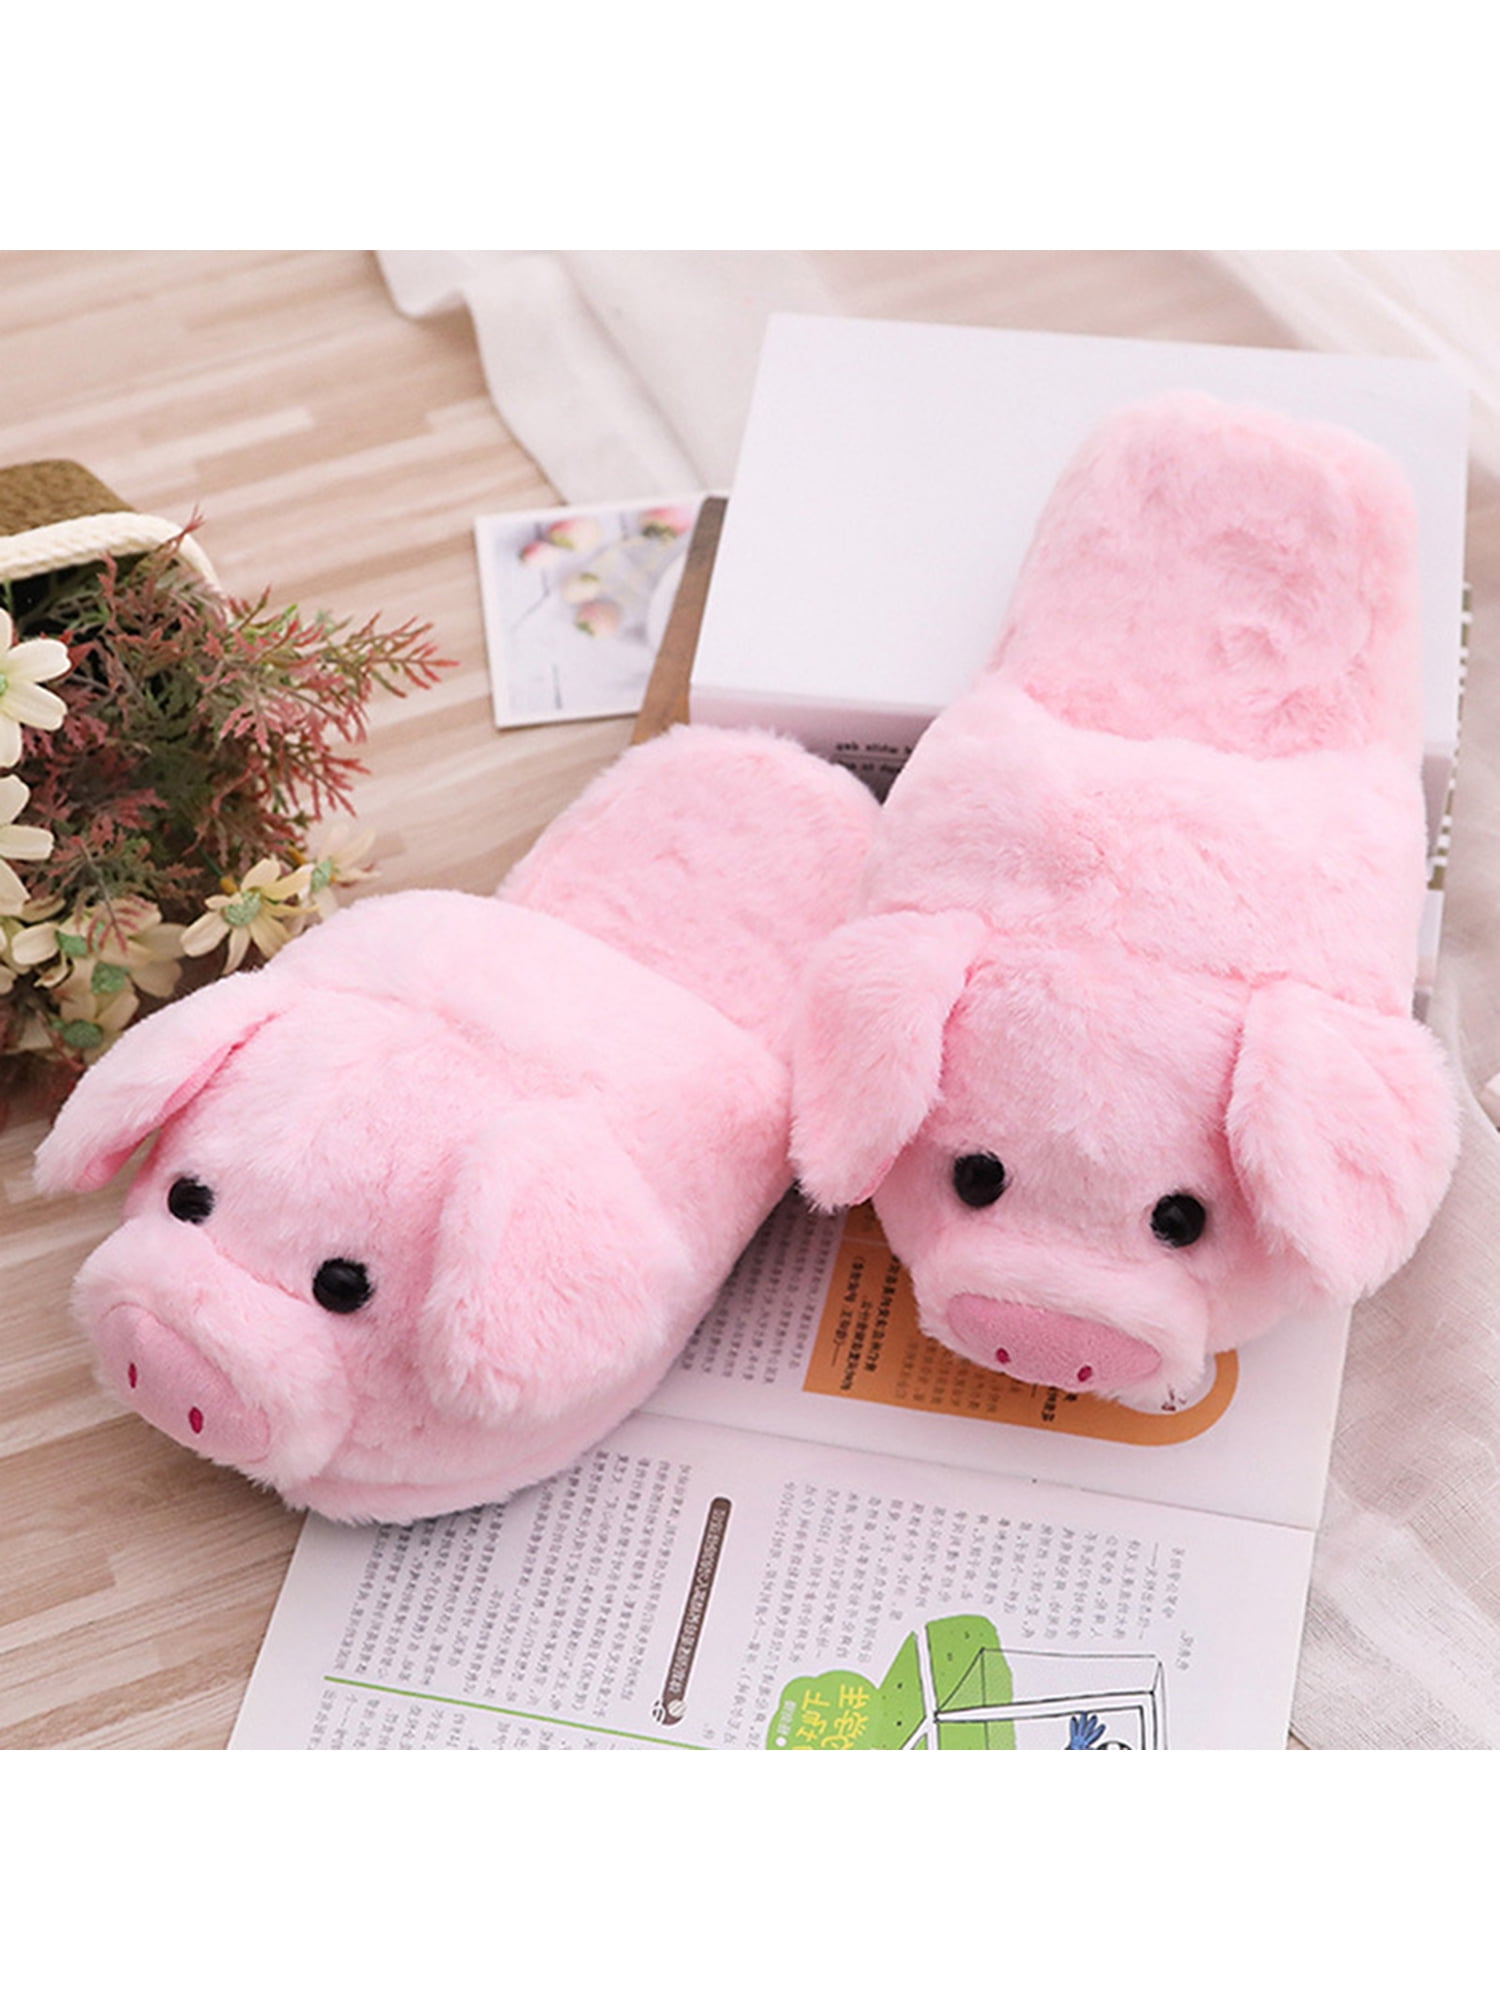 Winter Women Slippers Indoor Shoes Pig Patterned Cotton Plush Home Footwear Shoe